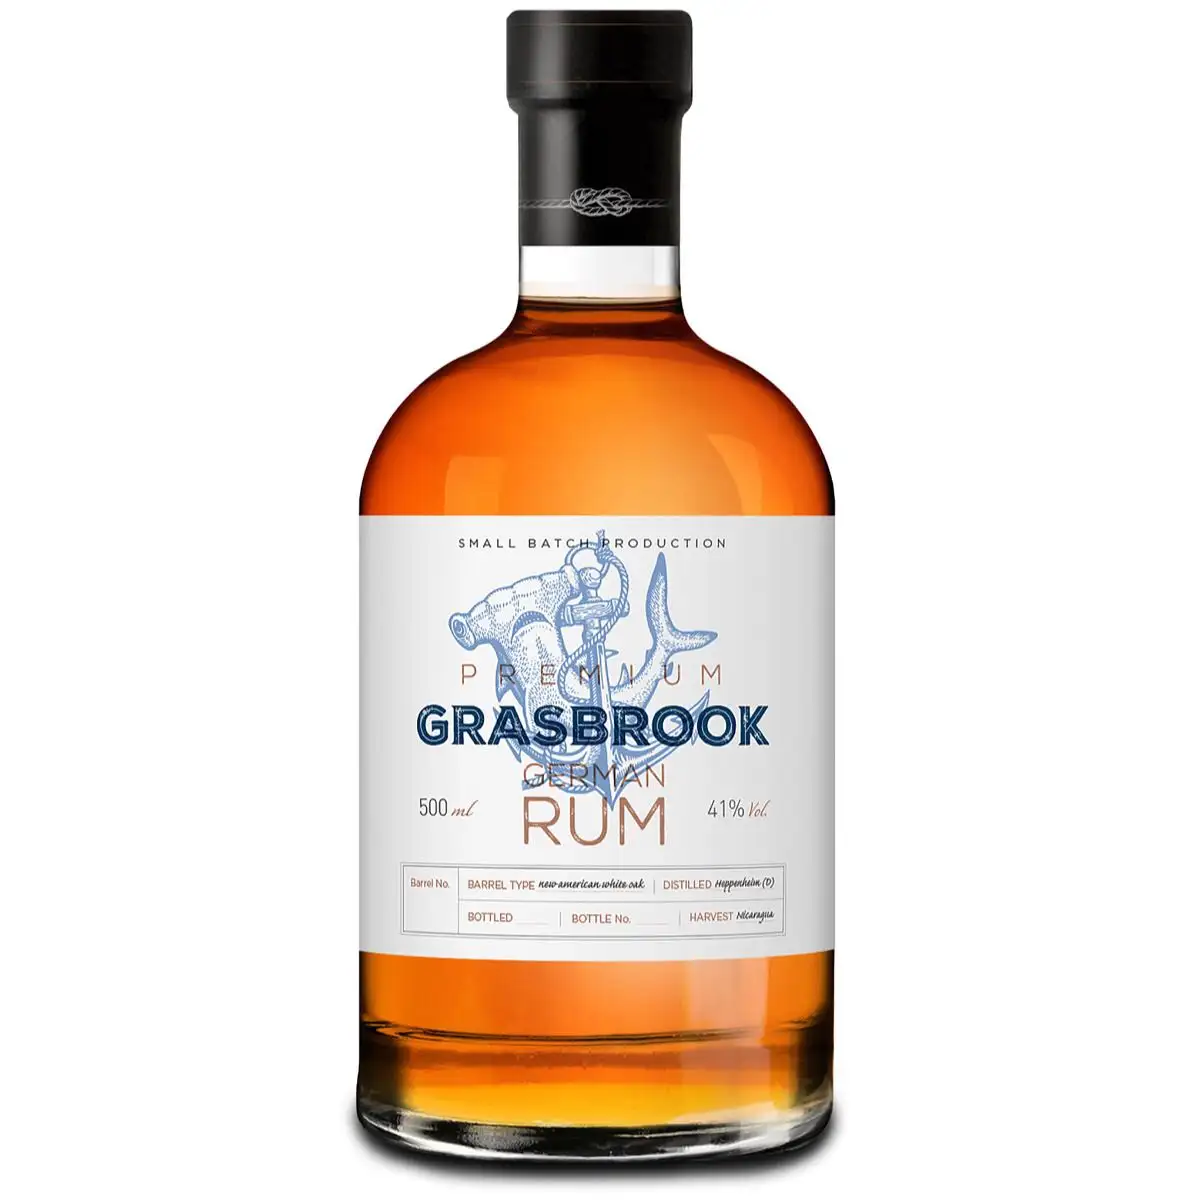 Image of the front of the bottle of the rum Grasbrook